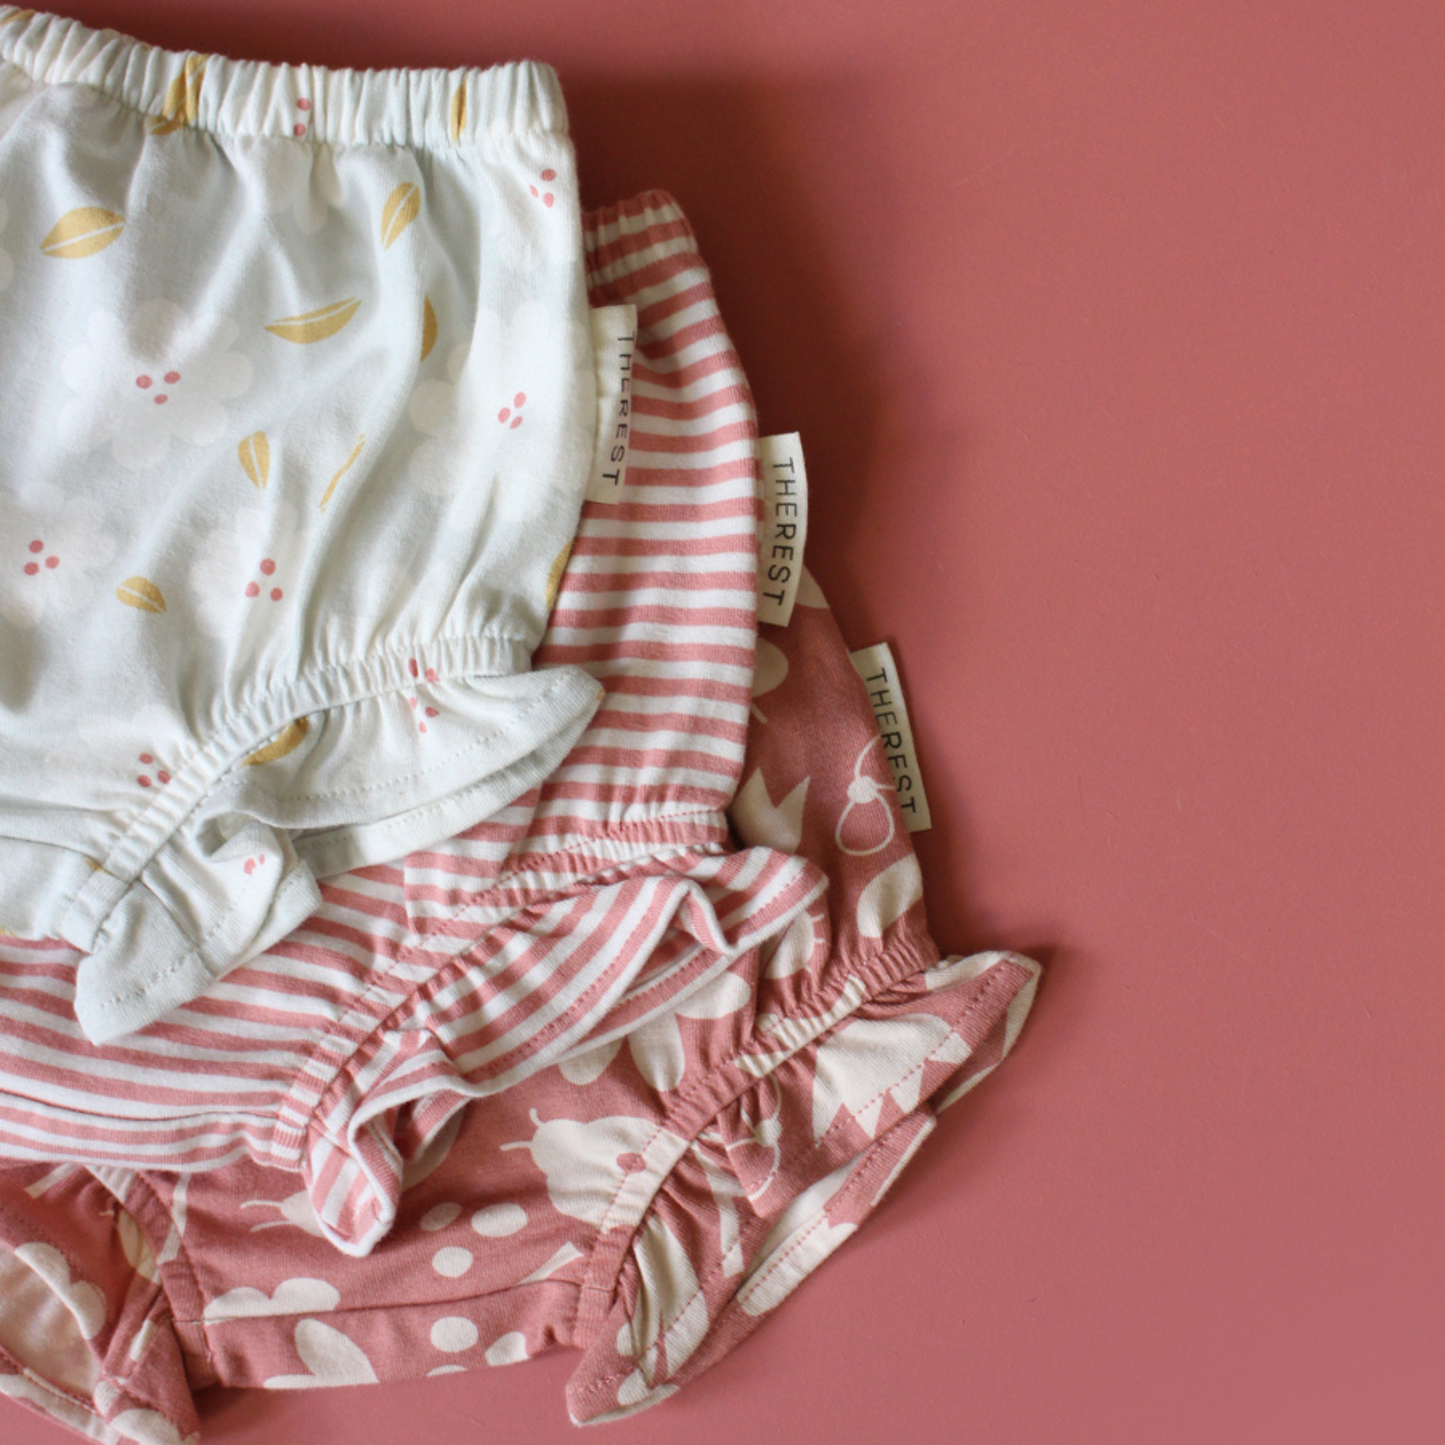 THE REST -  Frill Bloomers | Clay Stripe